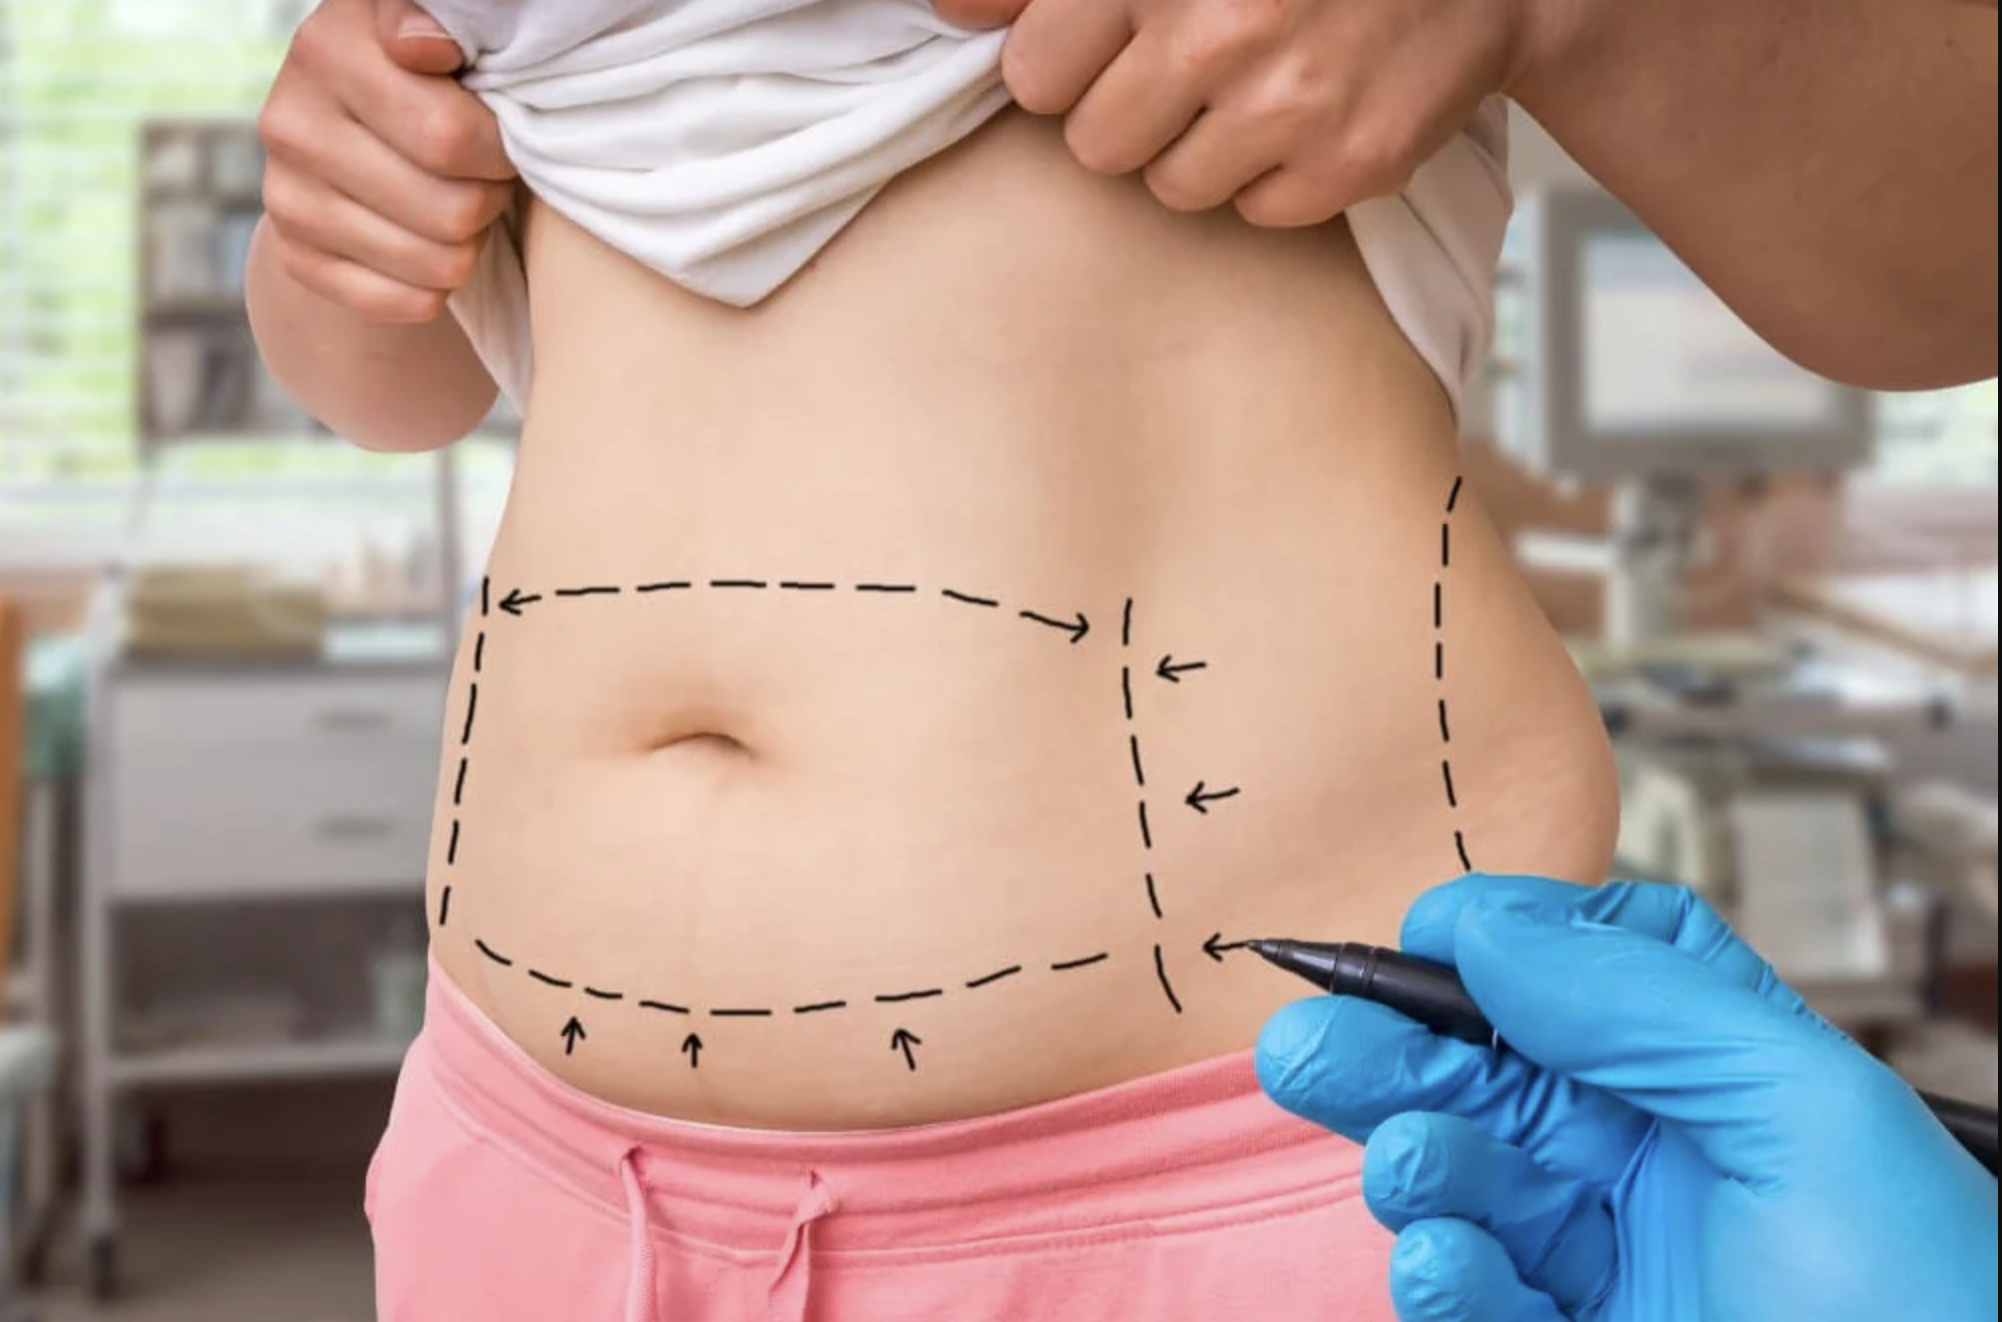 North Shore Cosmetic Surgery Blog | Your Guide to a Successful Tummy Lift Surgery and Recovery